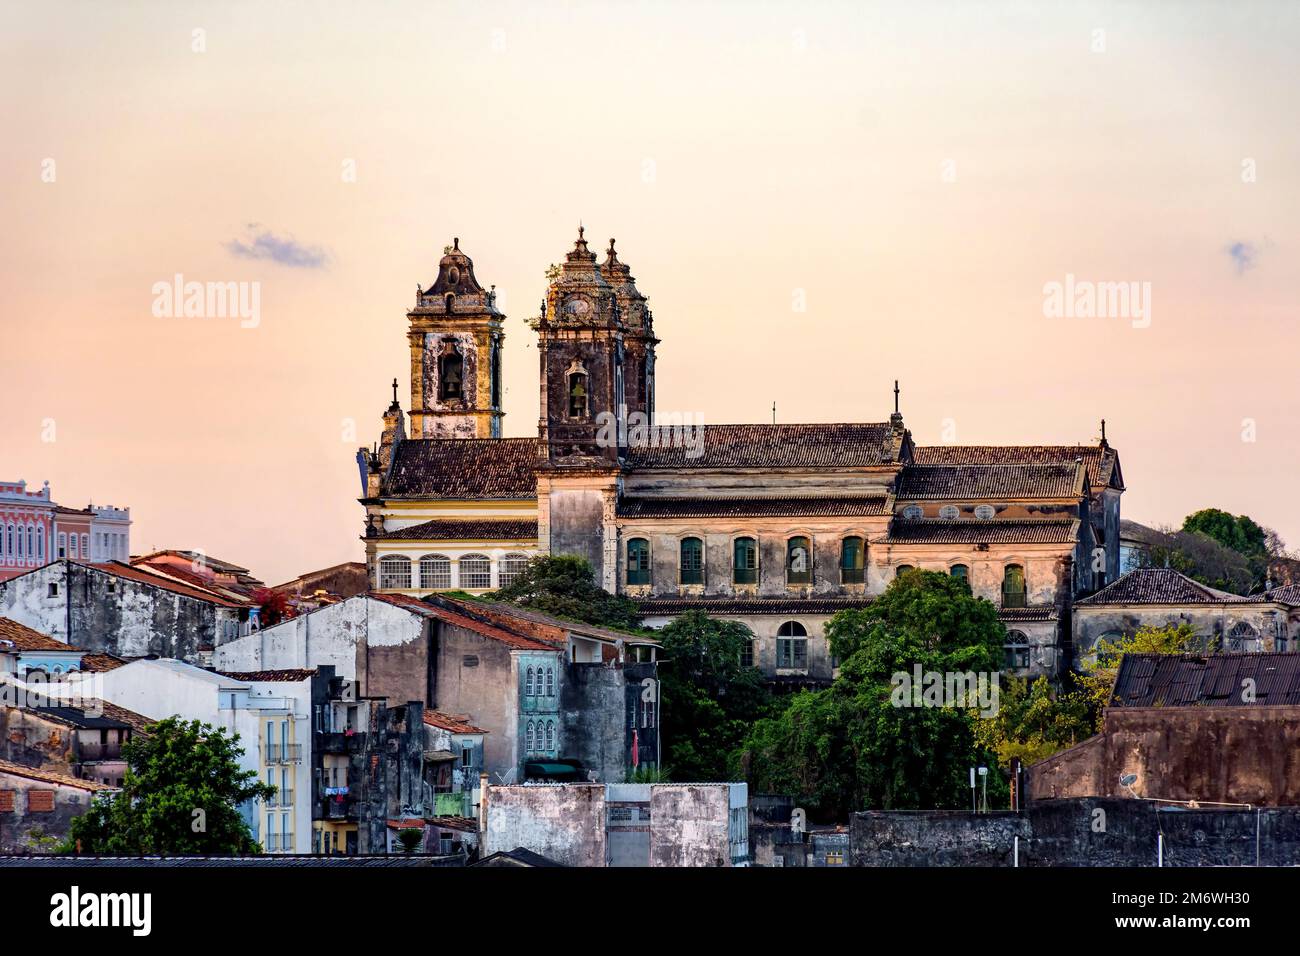 Old baroque church deteriorated by time in Pelourinho Stock Photo